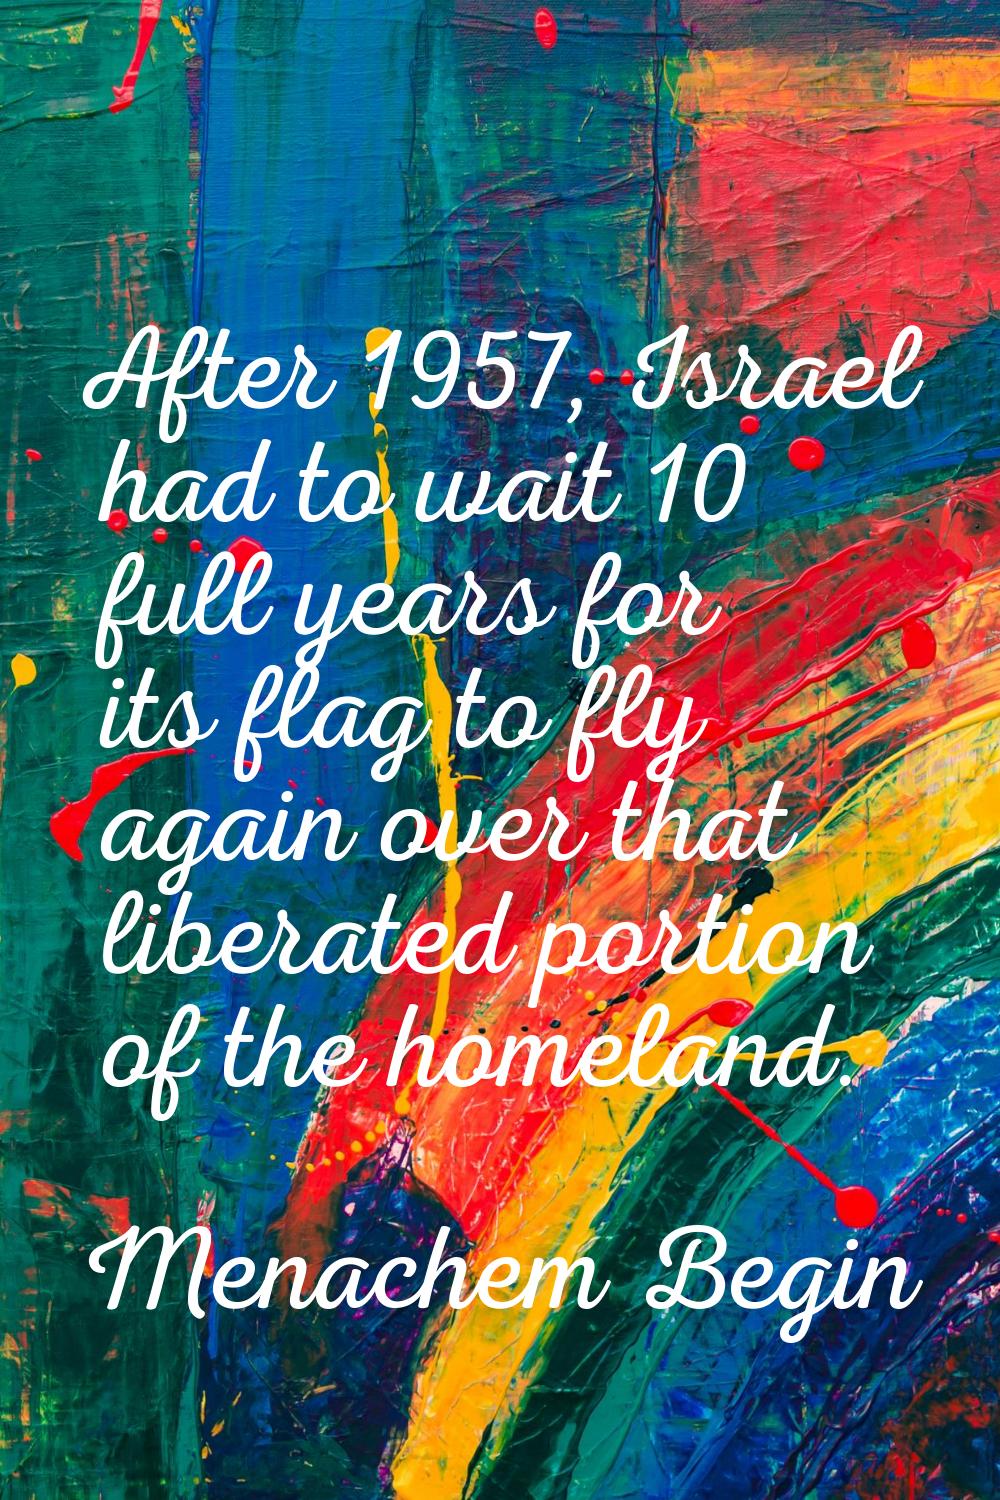 After 1957, Israel had to wait 10 full years for its flag to fly again over that liberated portion 